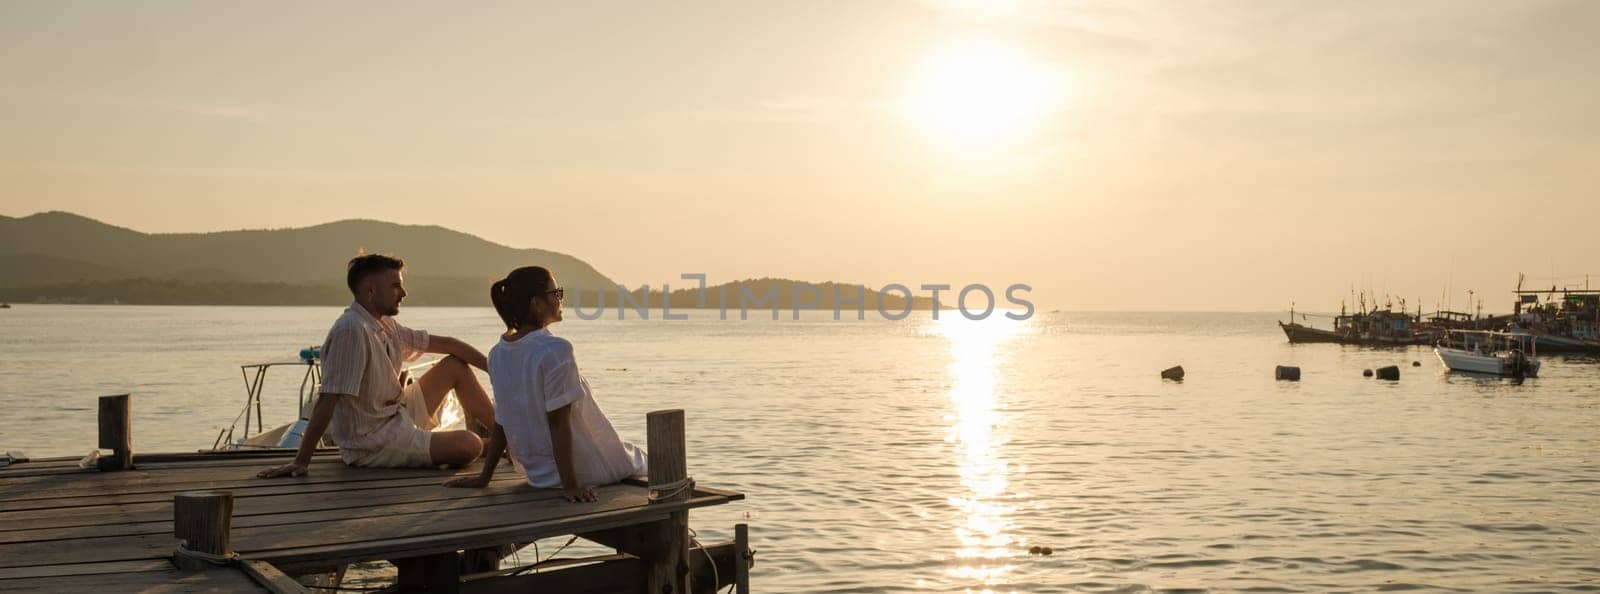 couple sitting on a wooden deck pier in the ocean during sunset in Samaesan Thailand by fokkebok